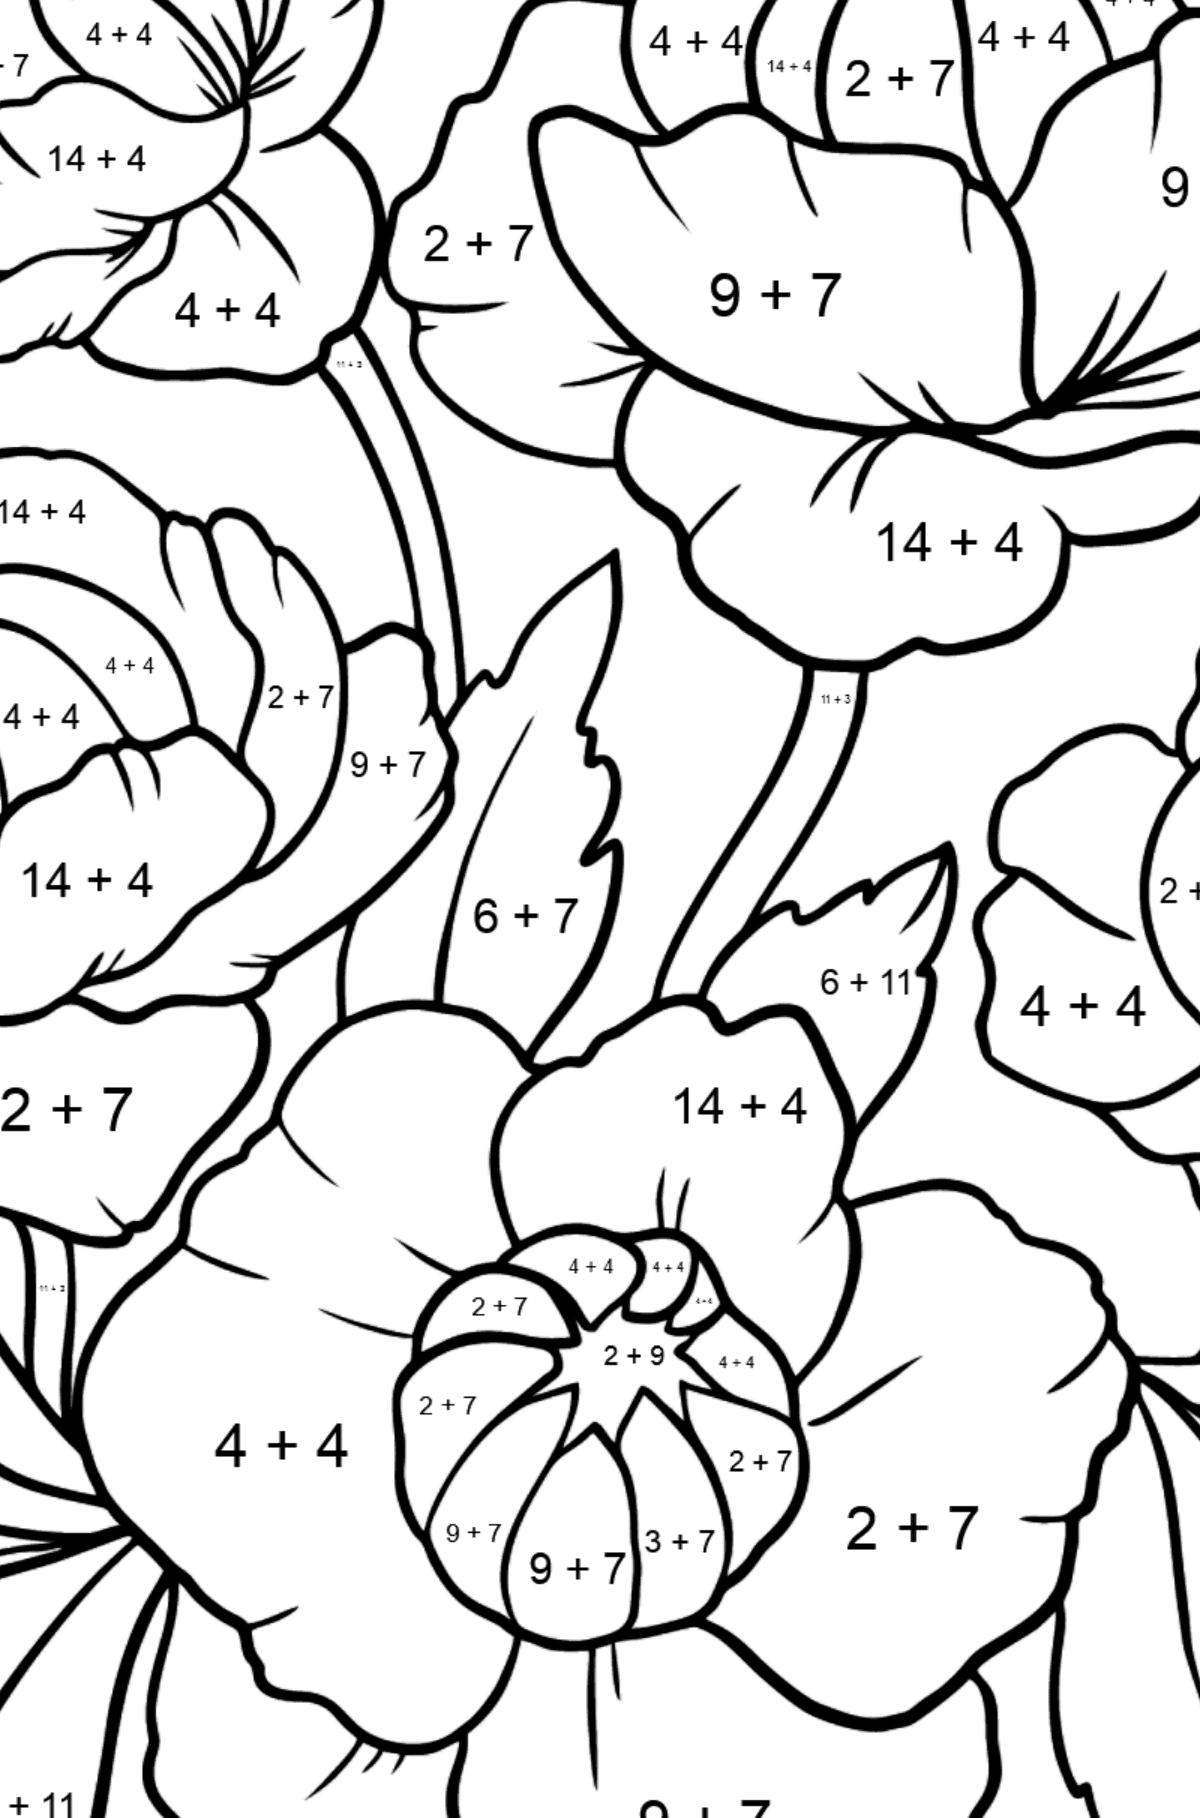 Red Globeflower Coloring Page - Math Coloring - Addition for Kids